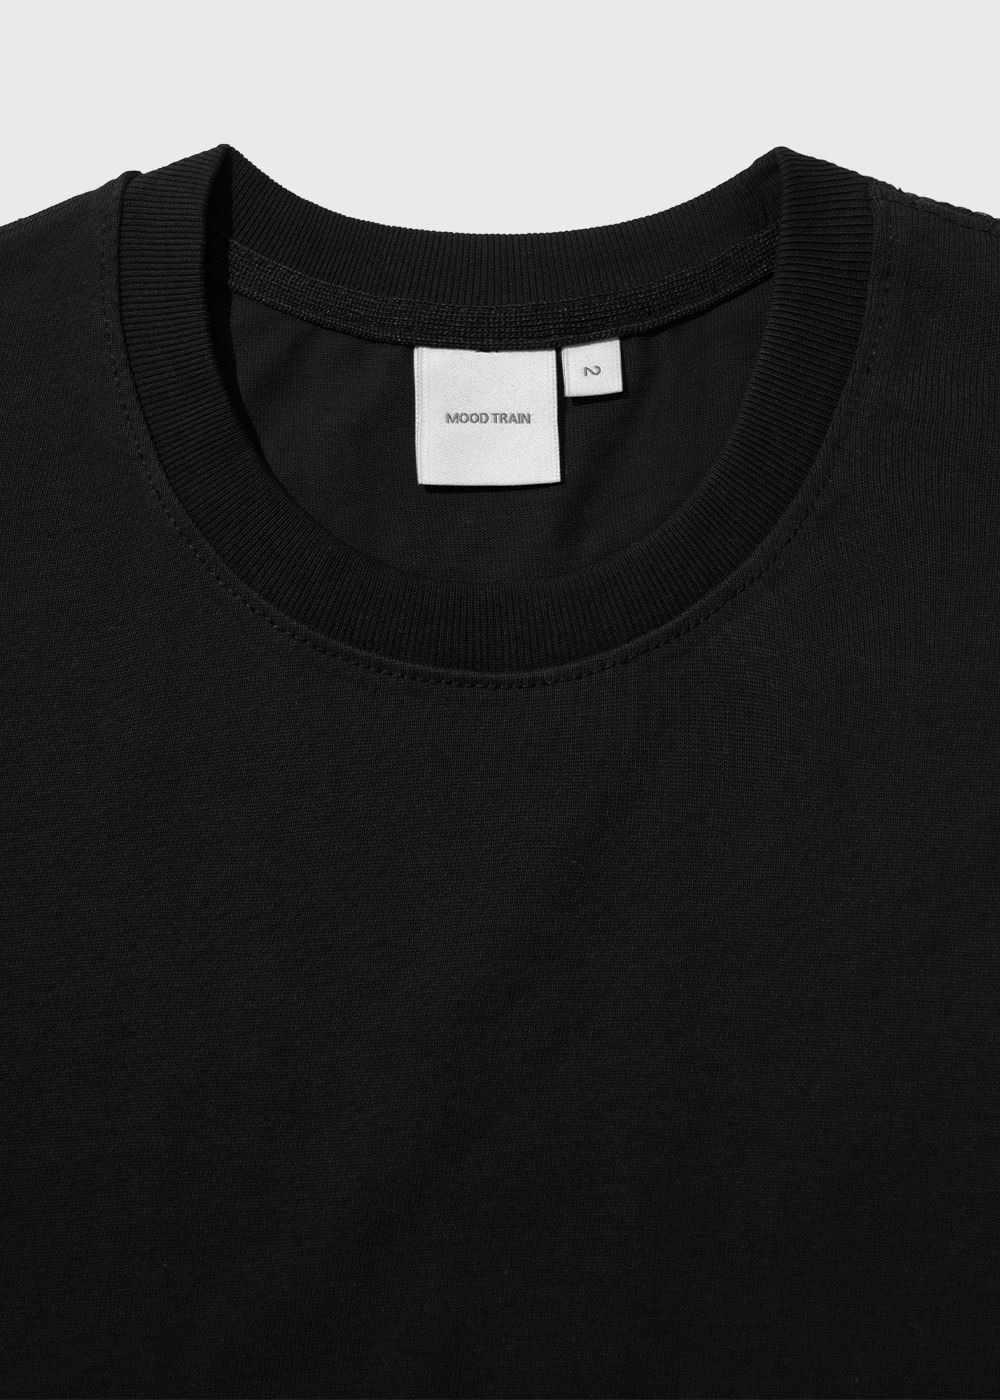 A. Silked Combed Cotton 100% 20/2 Single T-shirt _ black